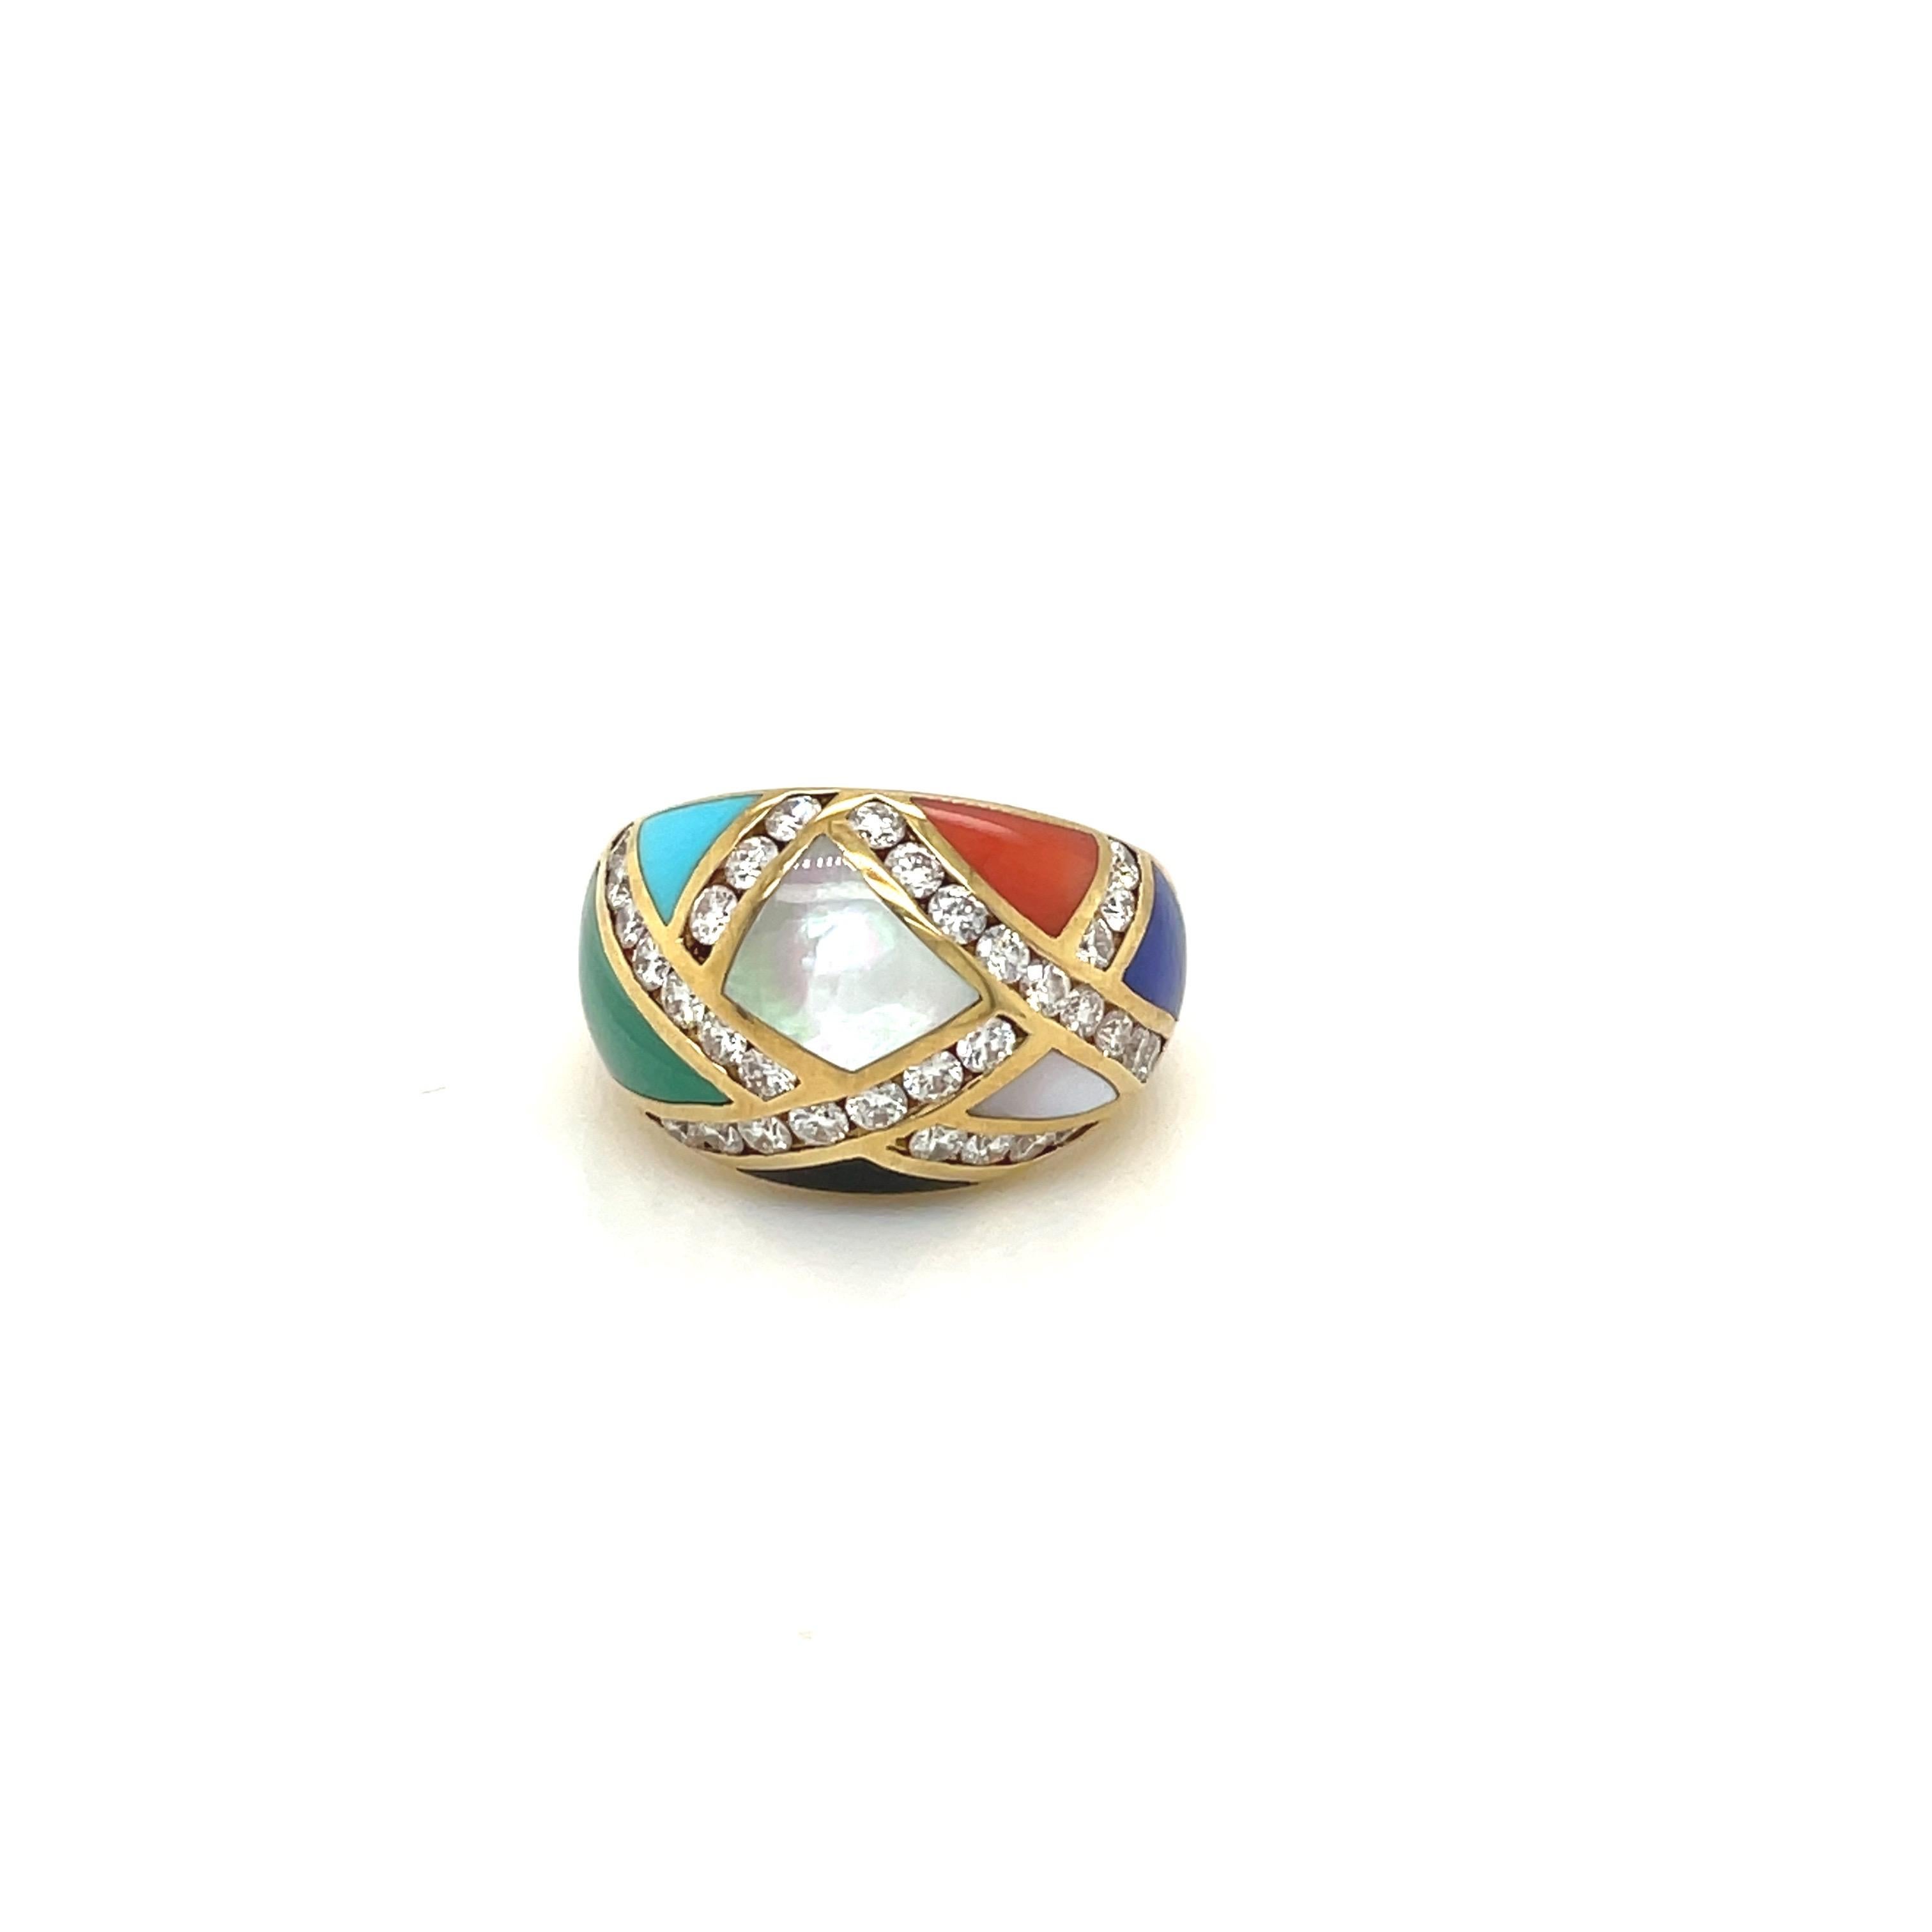 Asch Grossbardt 18KT YG Diamond 1.00Ct. & Inlaid  Semi Precious Stones Dome Ring In New Condition For Sale In New York, NY